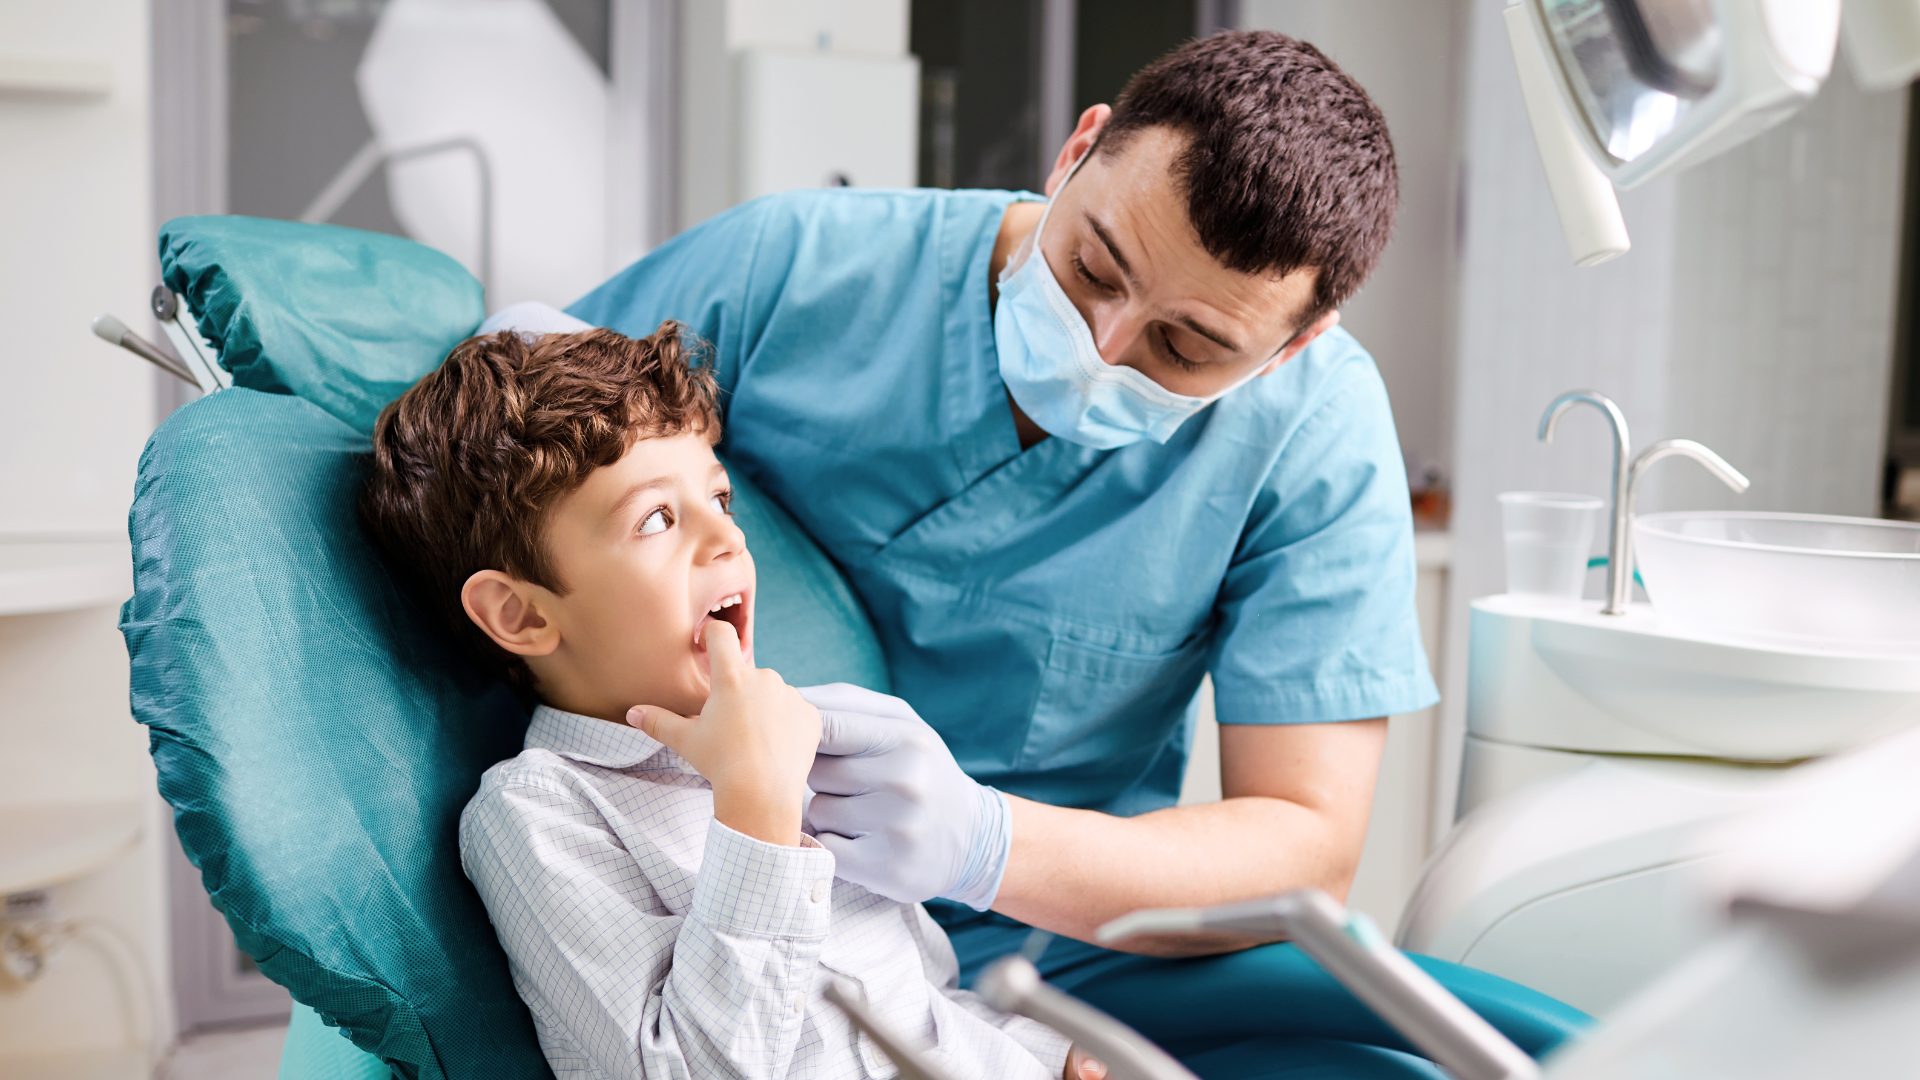 a young boy is sitting in a dental chair talking to a dentist .